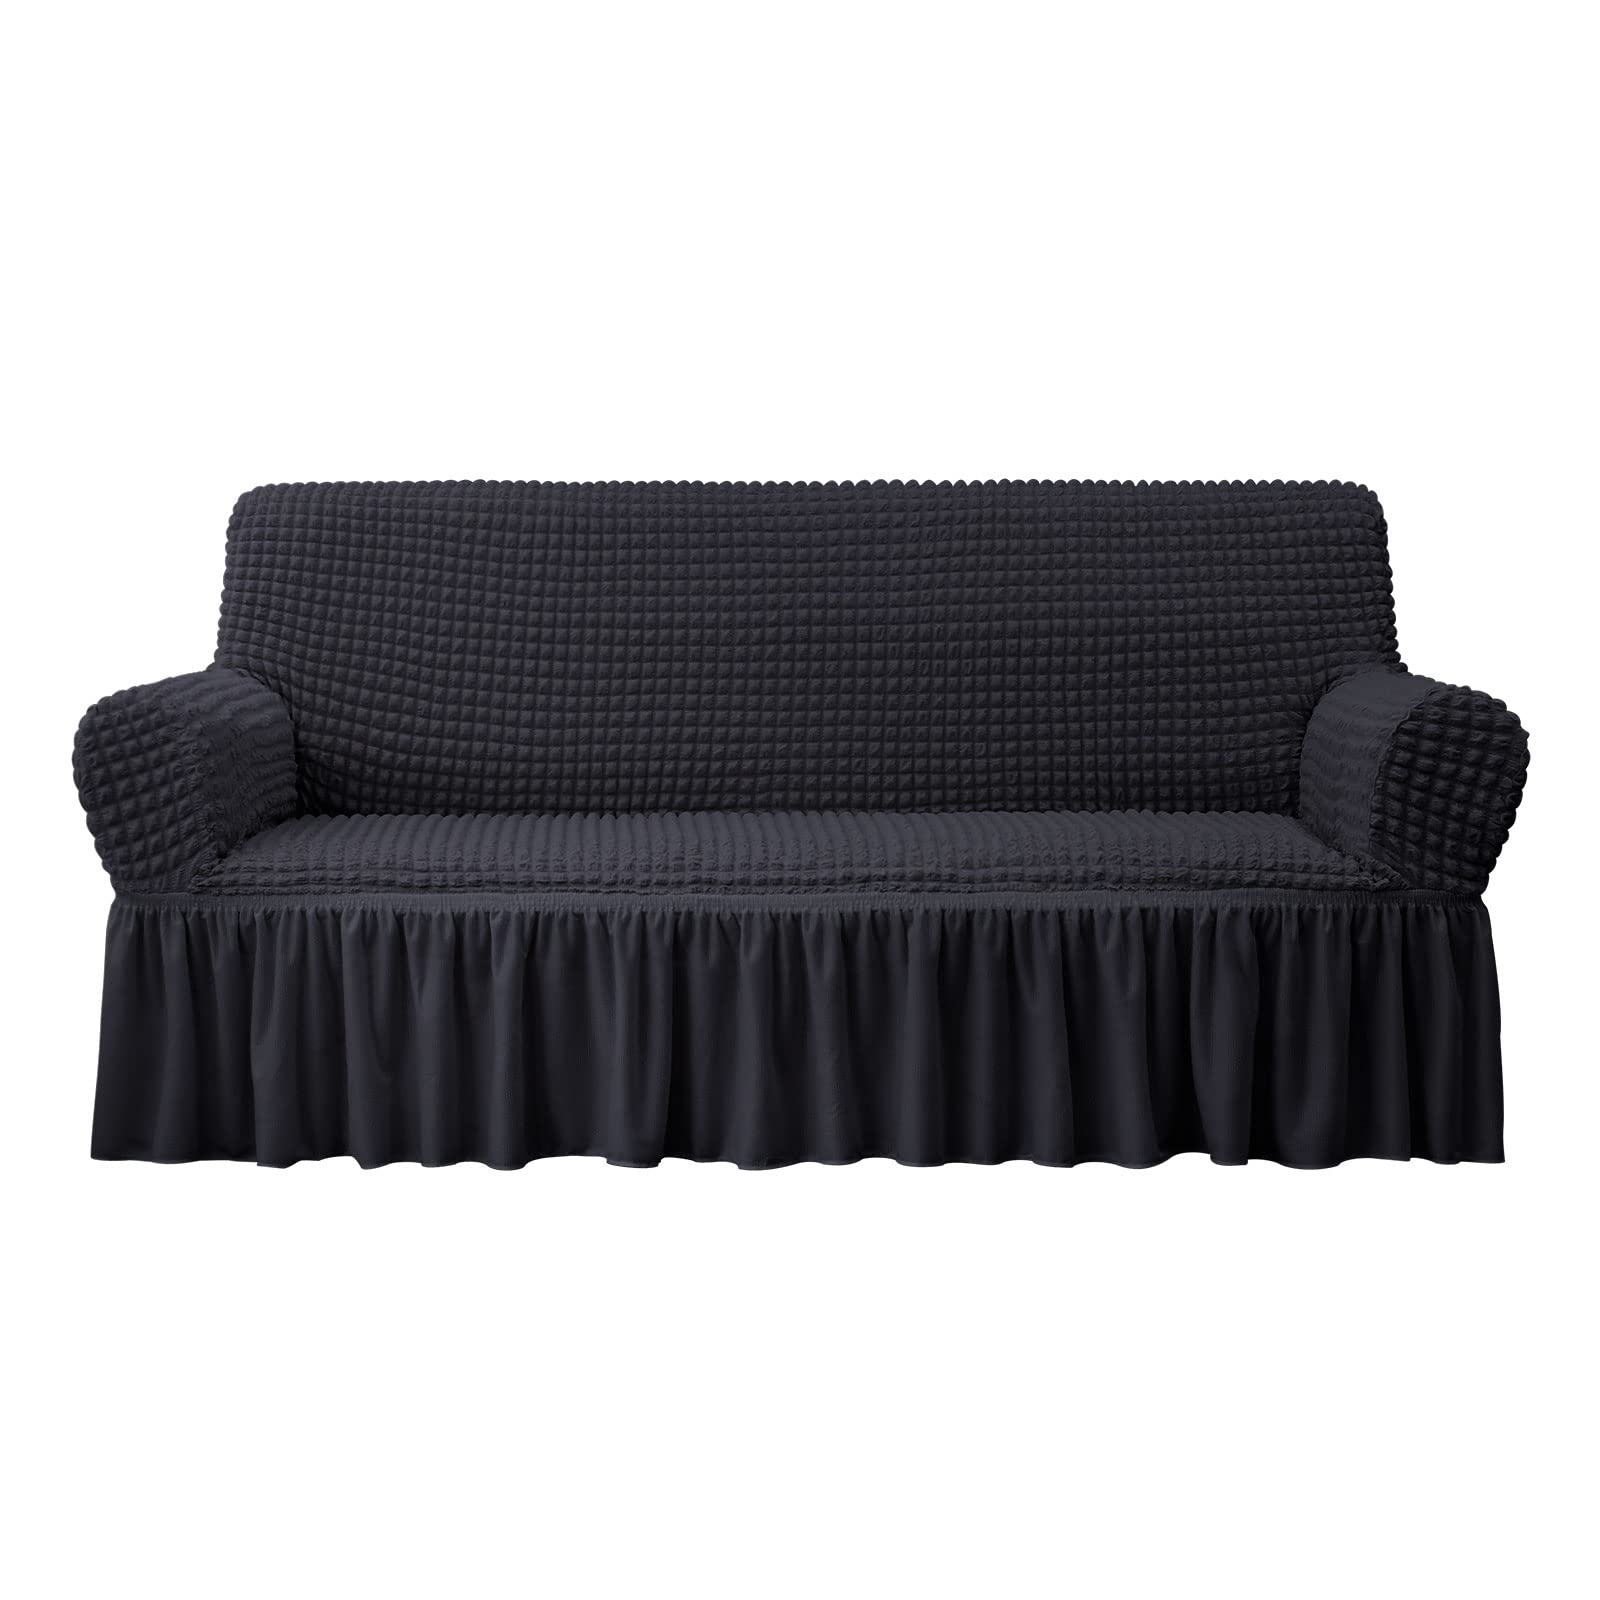 NICEEC Sofa Slipcover Black Sofa Cover 1 Piece Easy Fitted Sofa Couch Covers Universal High Stretch Durable Furniture Protector 